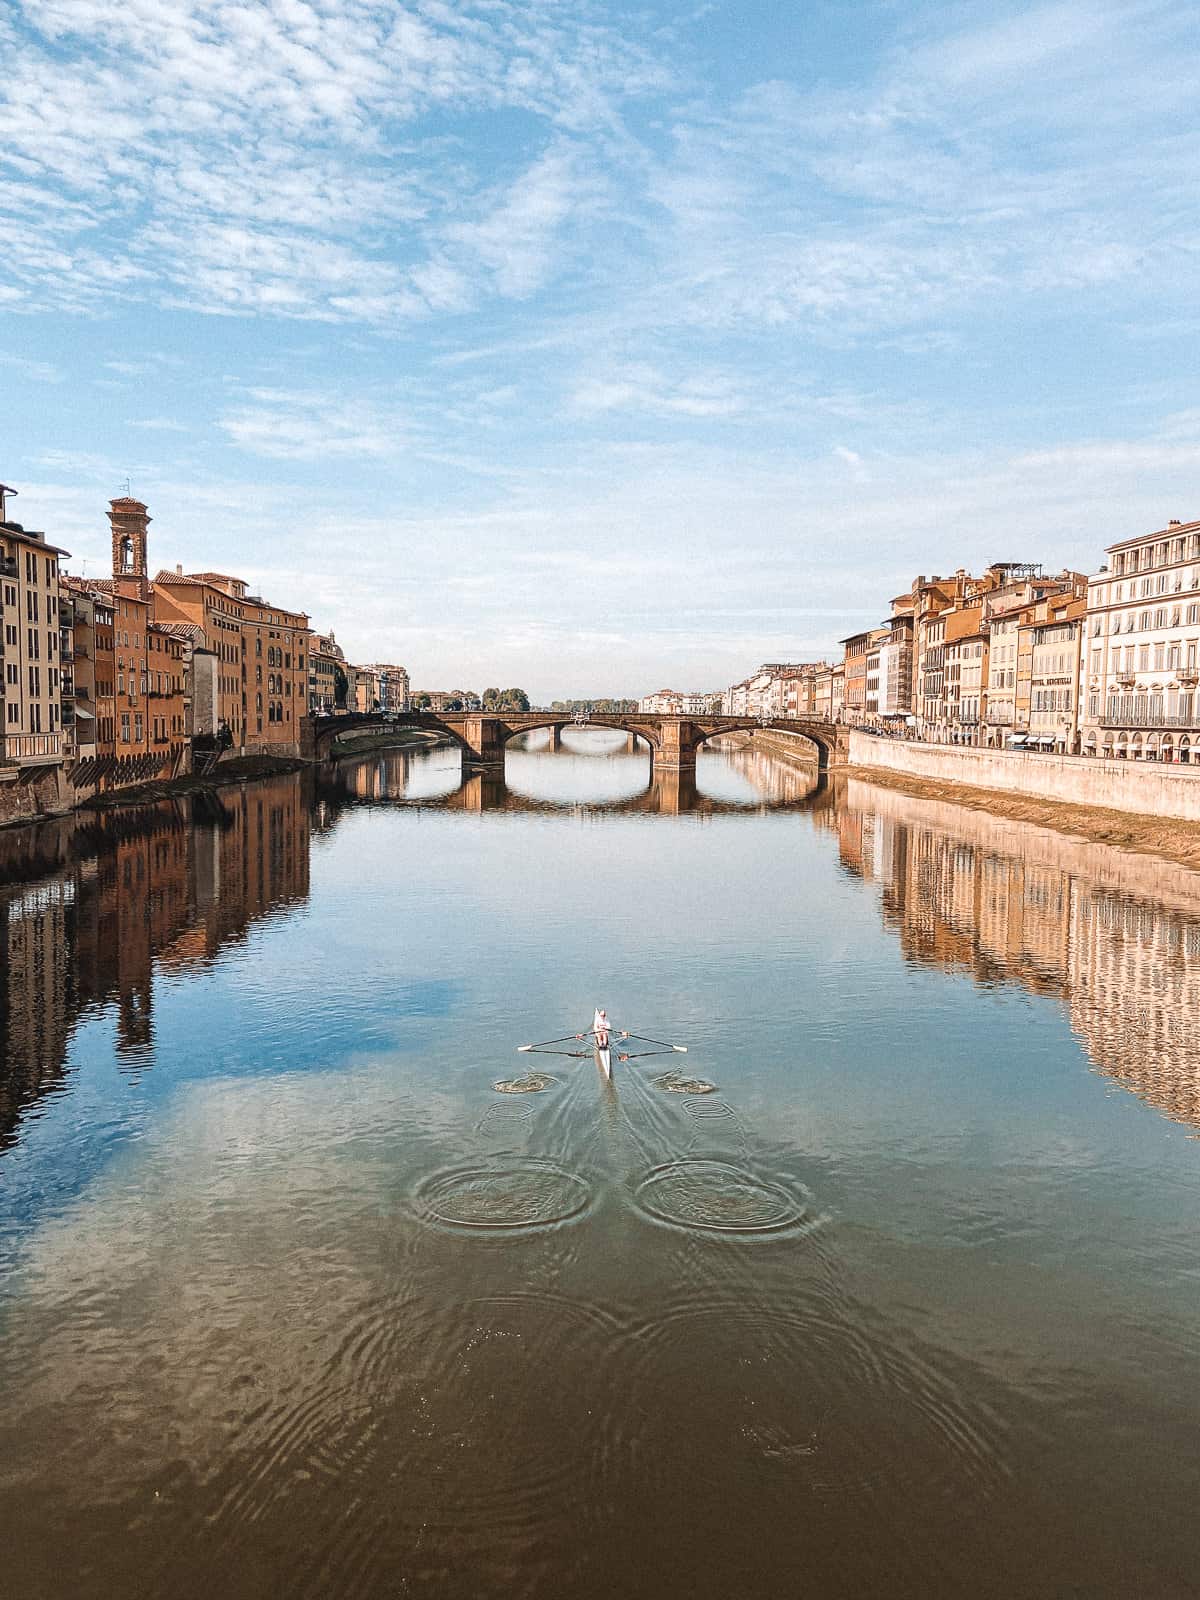 A serene view of Florence's Arno River, with a lone rower in the center creating ripples on the water's surface, framed by historic buildings and the iconic Ponte Vecchio in the distance under a clear blue sky.